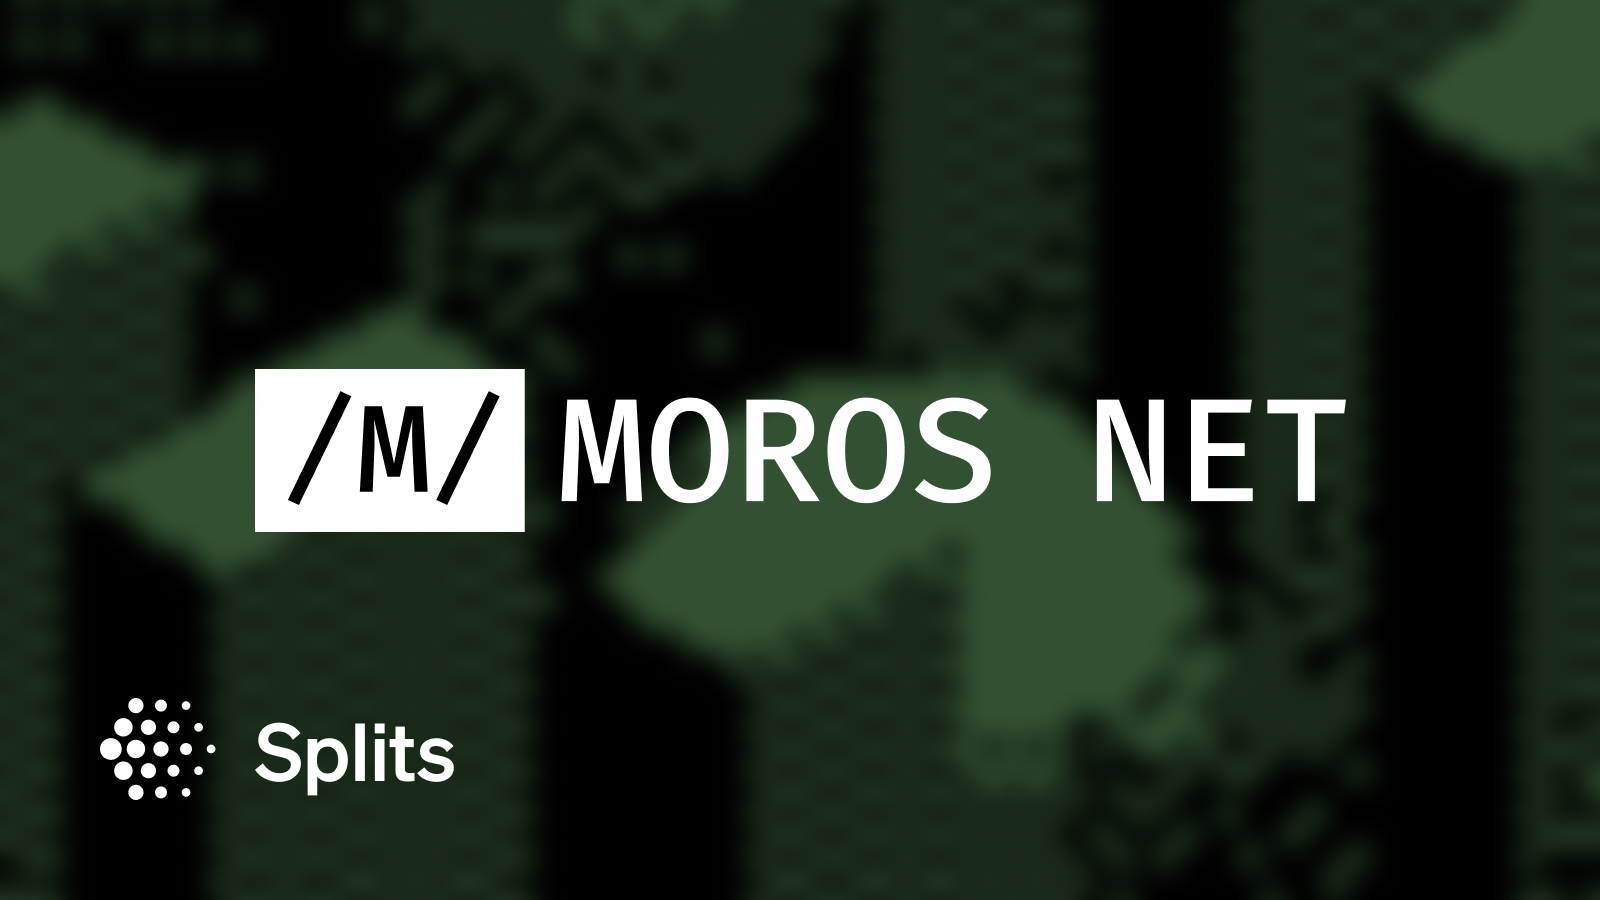 Feature image for MOROS NET leverages Splits to fund open-source AI